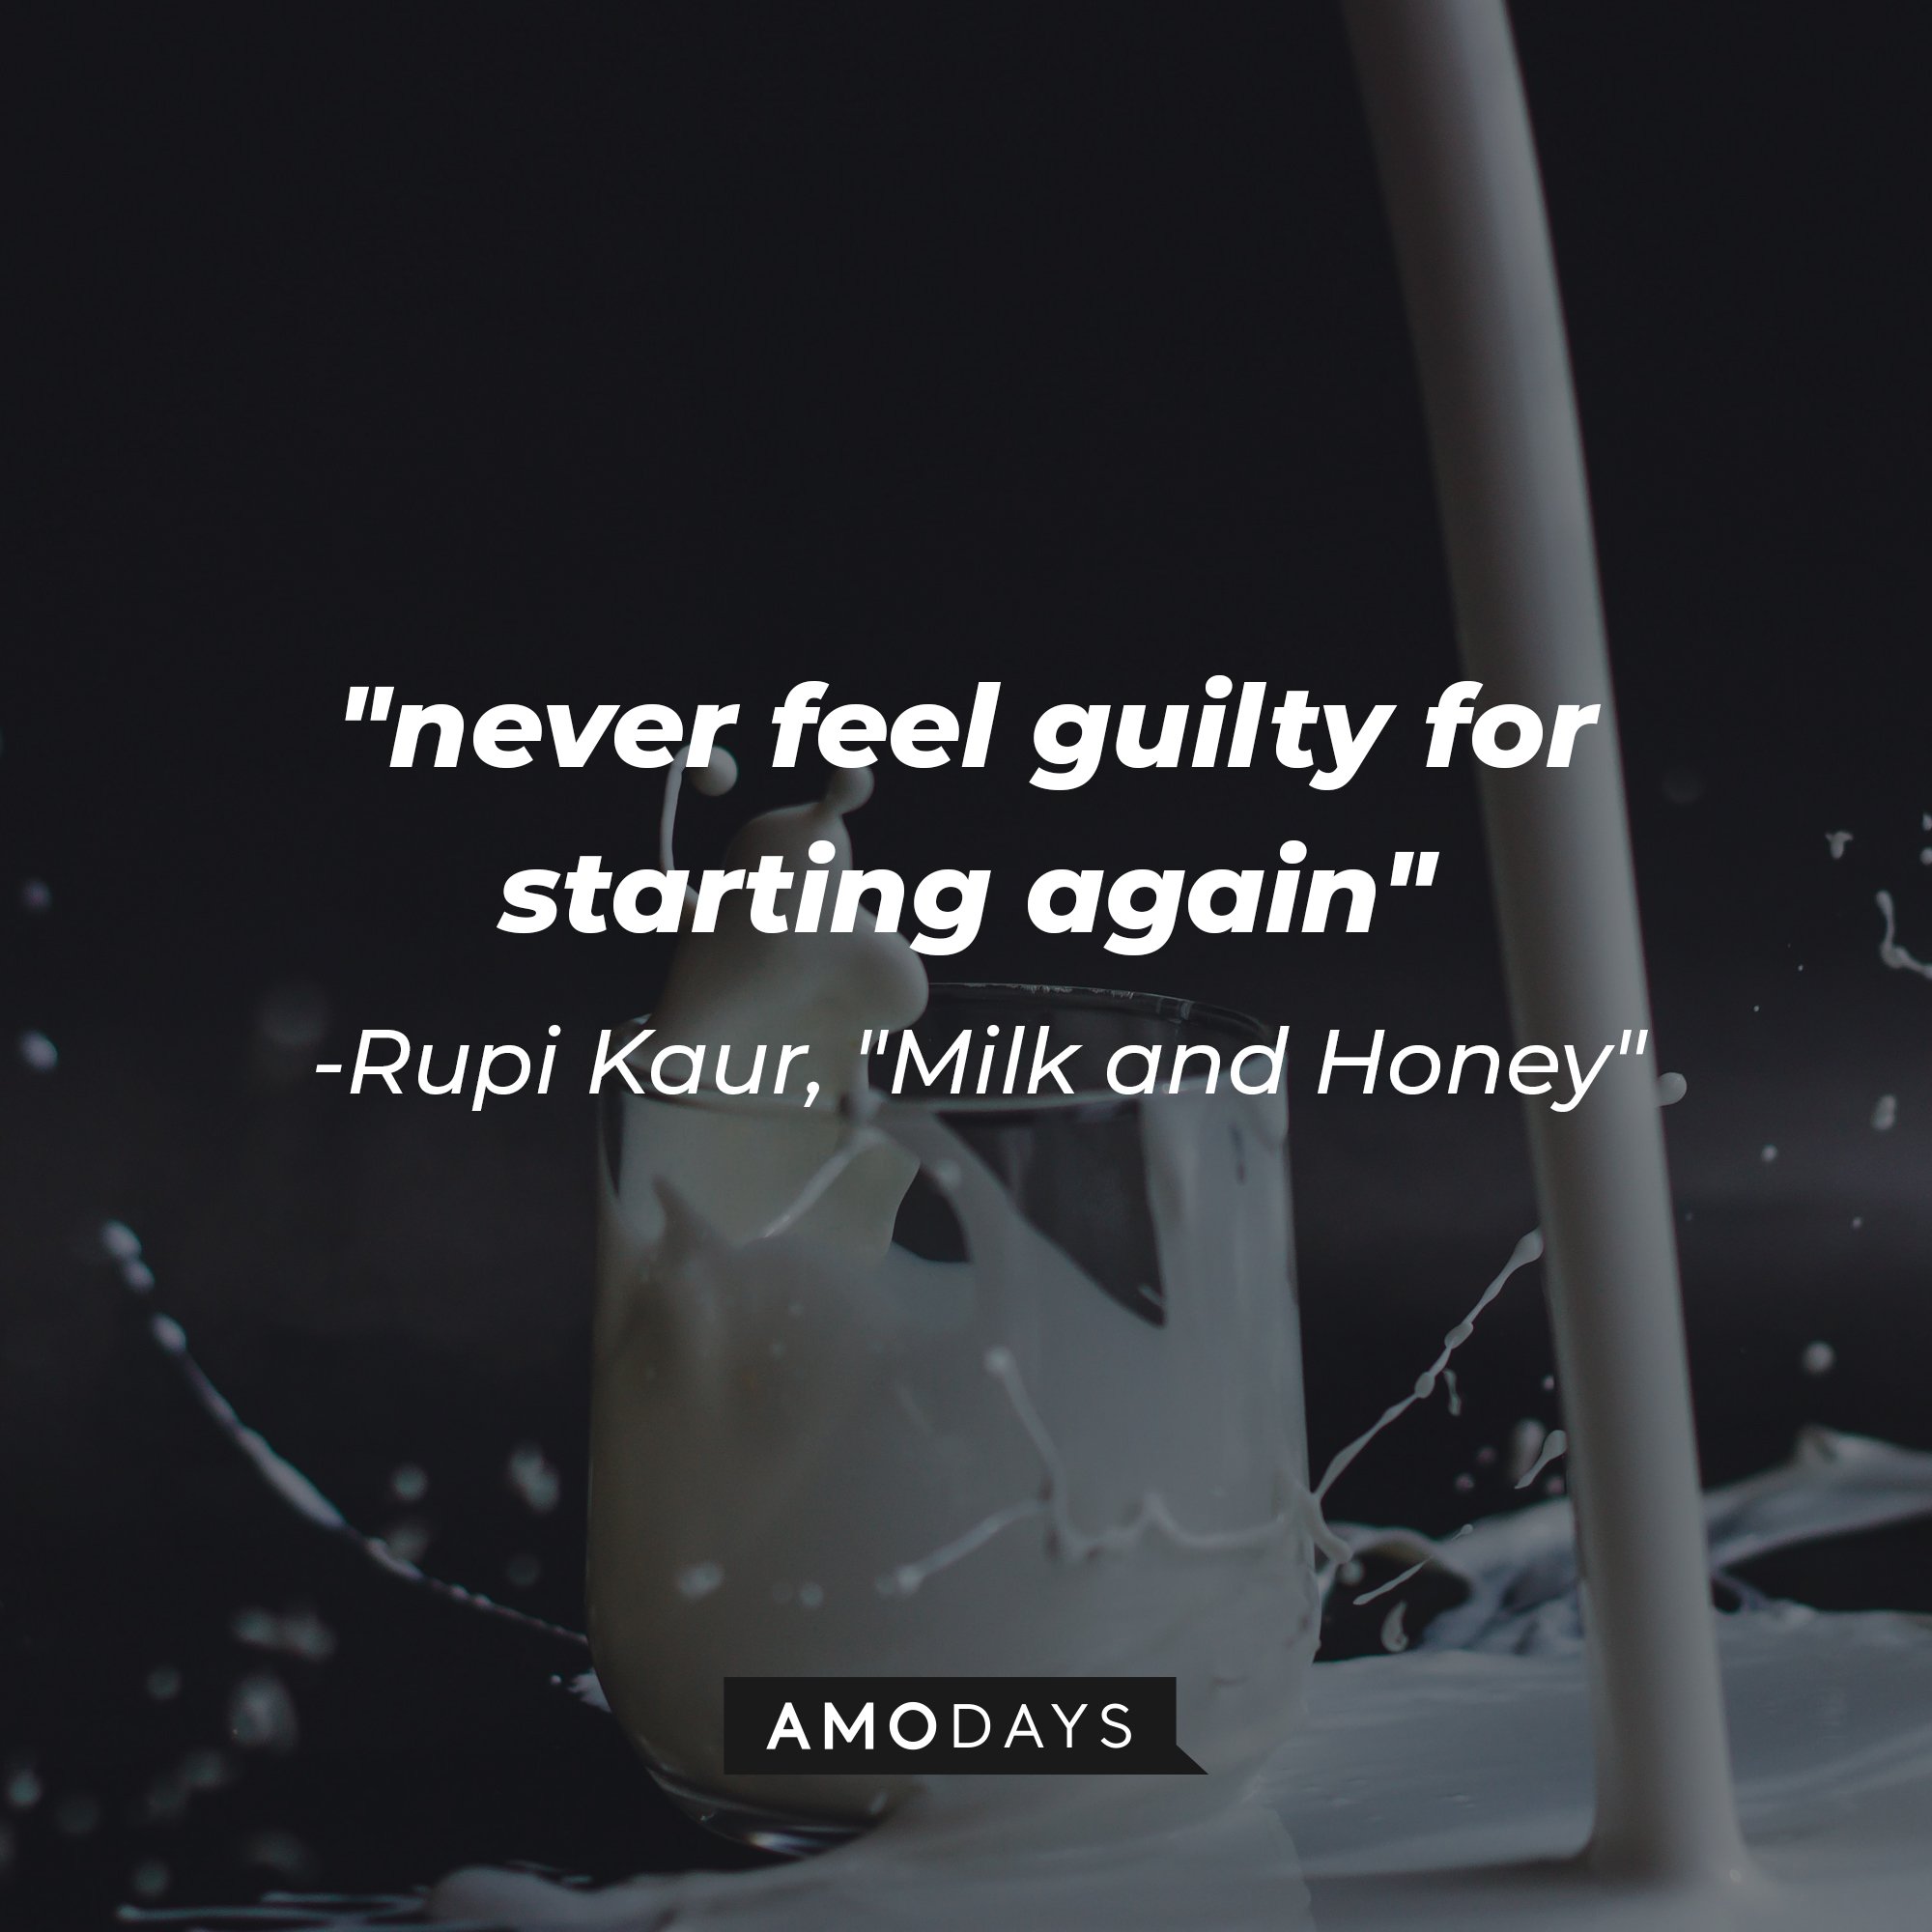 Rupi Kaur's "Milk and Honey" quote: "never feel guilty for starting again" | Image: AmoDays